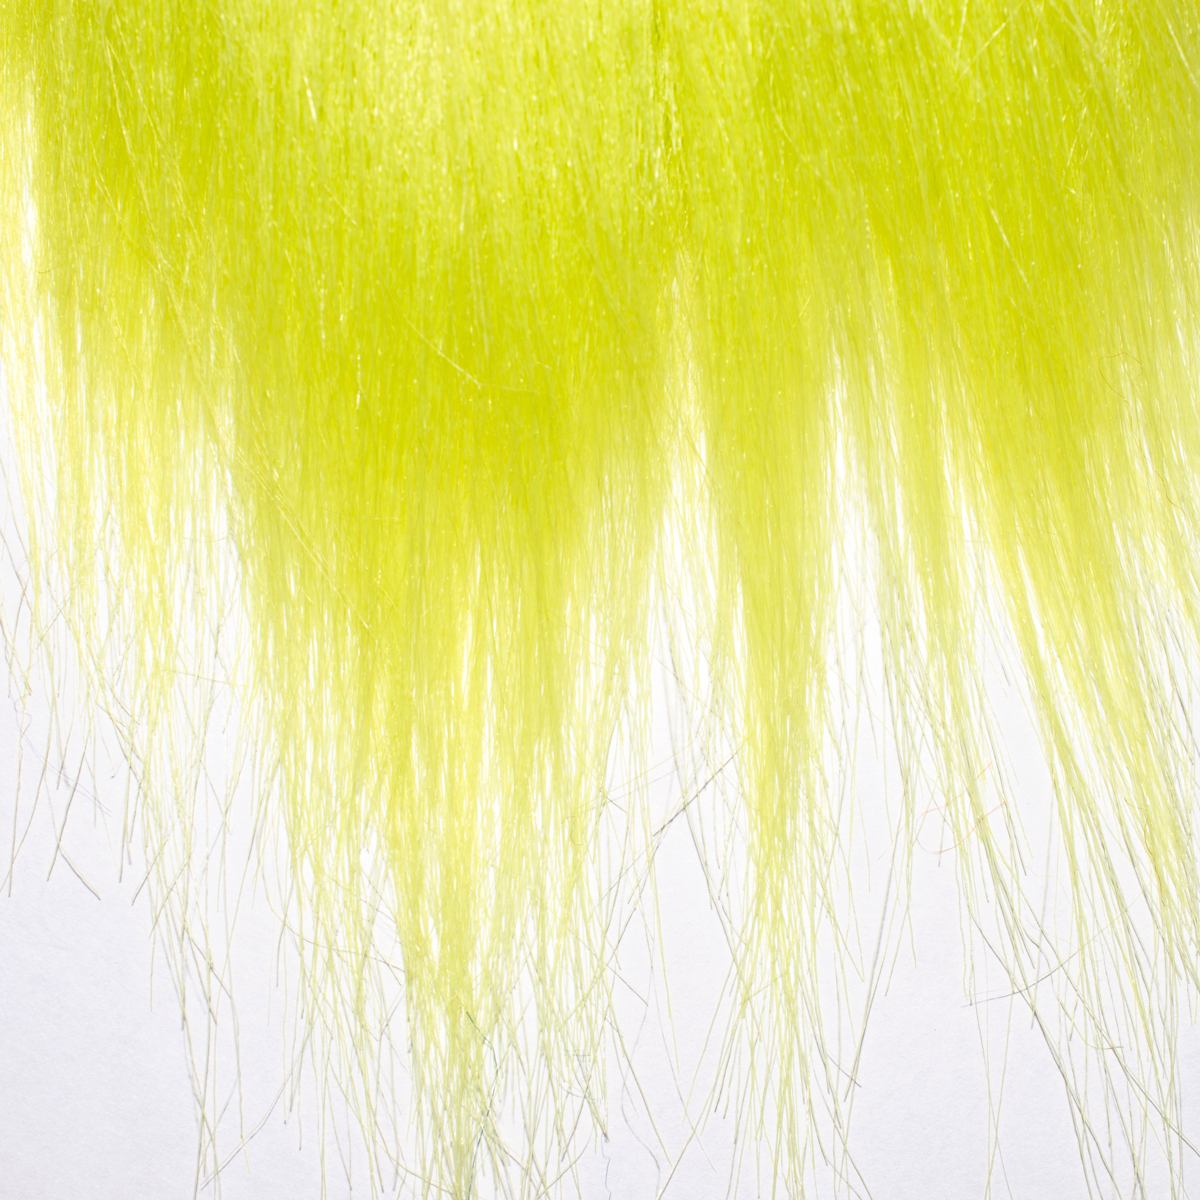 Chartreuse Fly Fur is included in the Redfish Fly Fur 4 Pack.